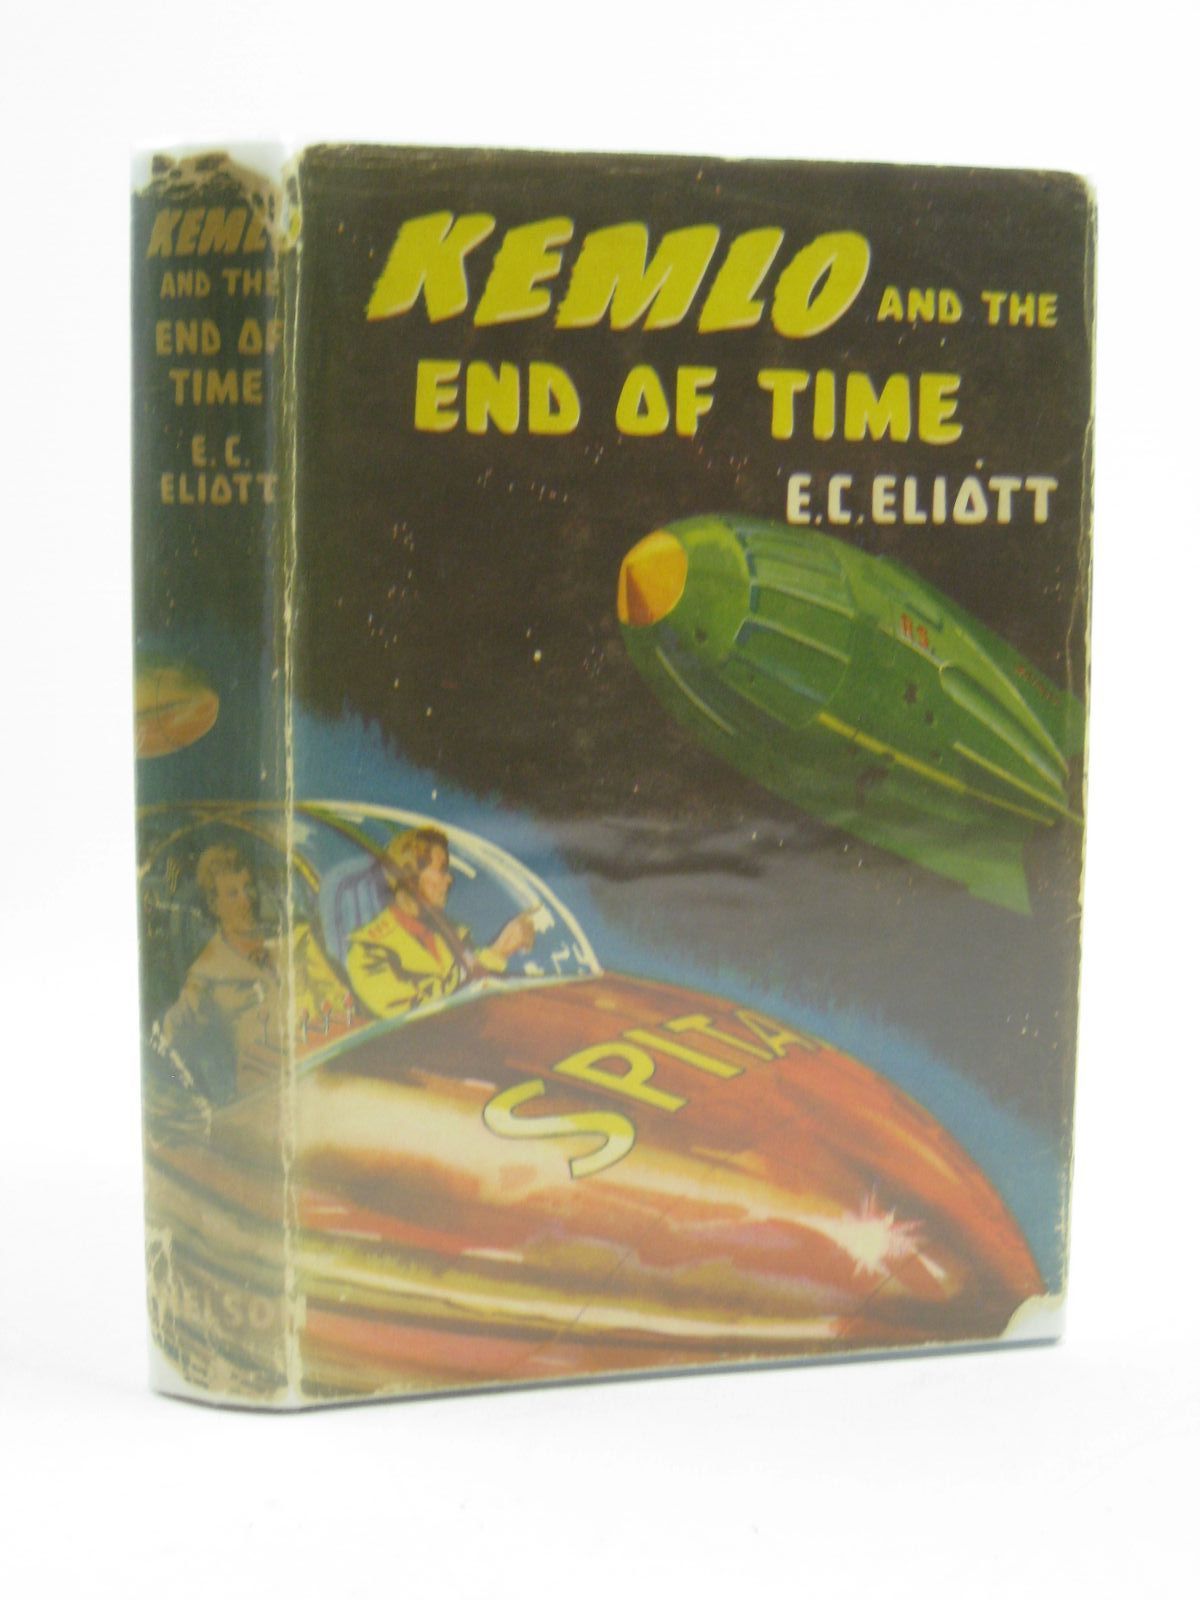 Cover of KEMLO AND THE END OF TIME by E.C. Eliott